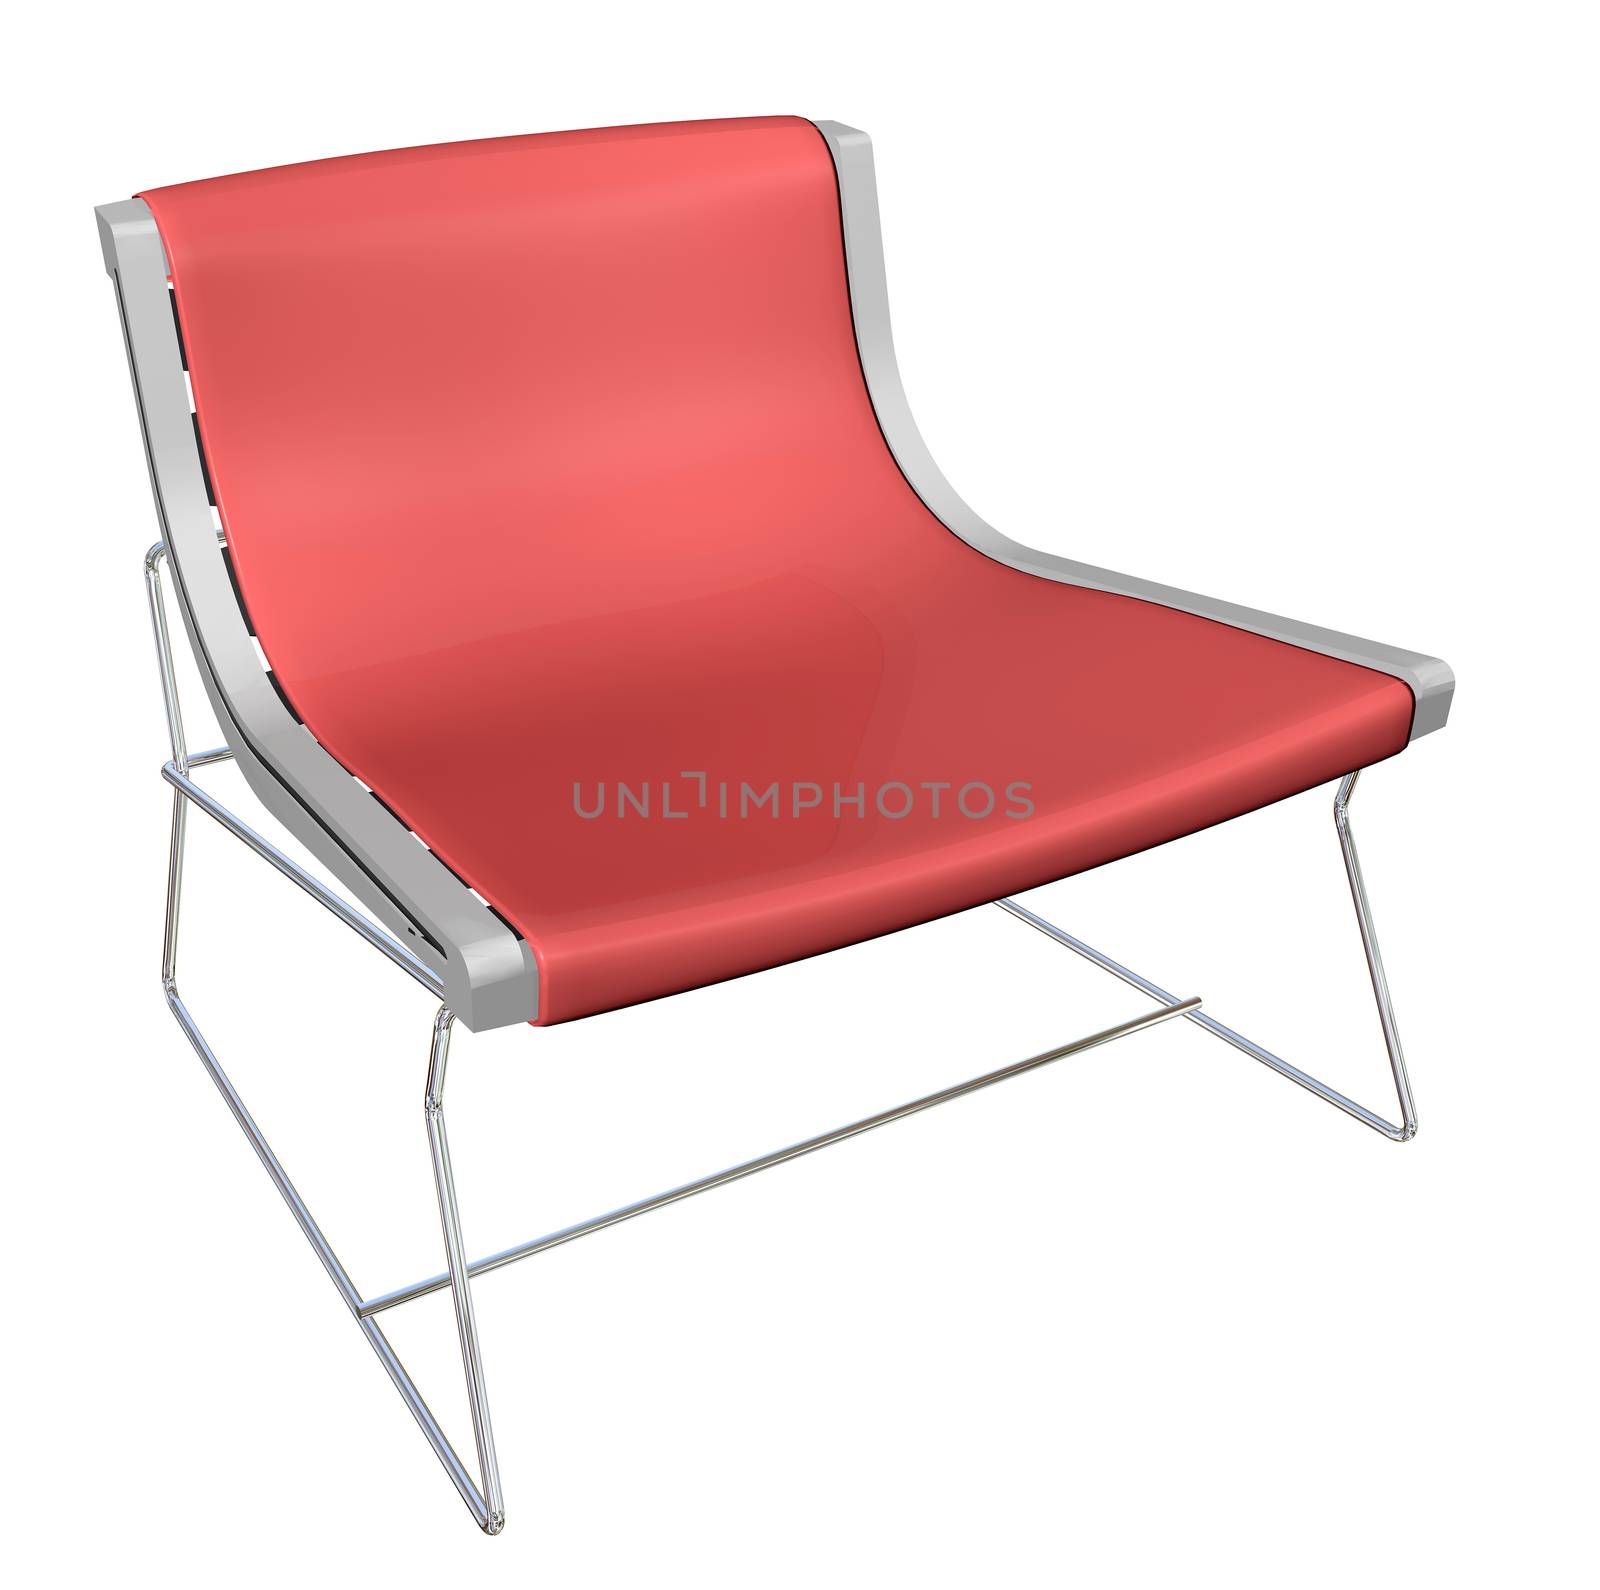 Low-back plastic chair, red, metal frame,  3D illustration, isolated against a white background.